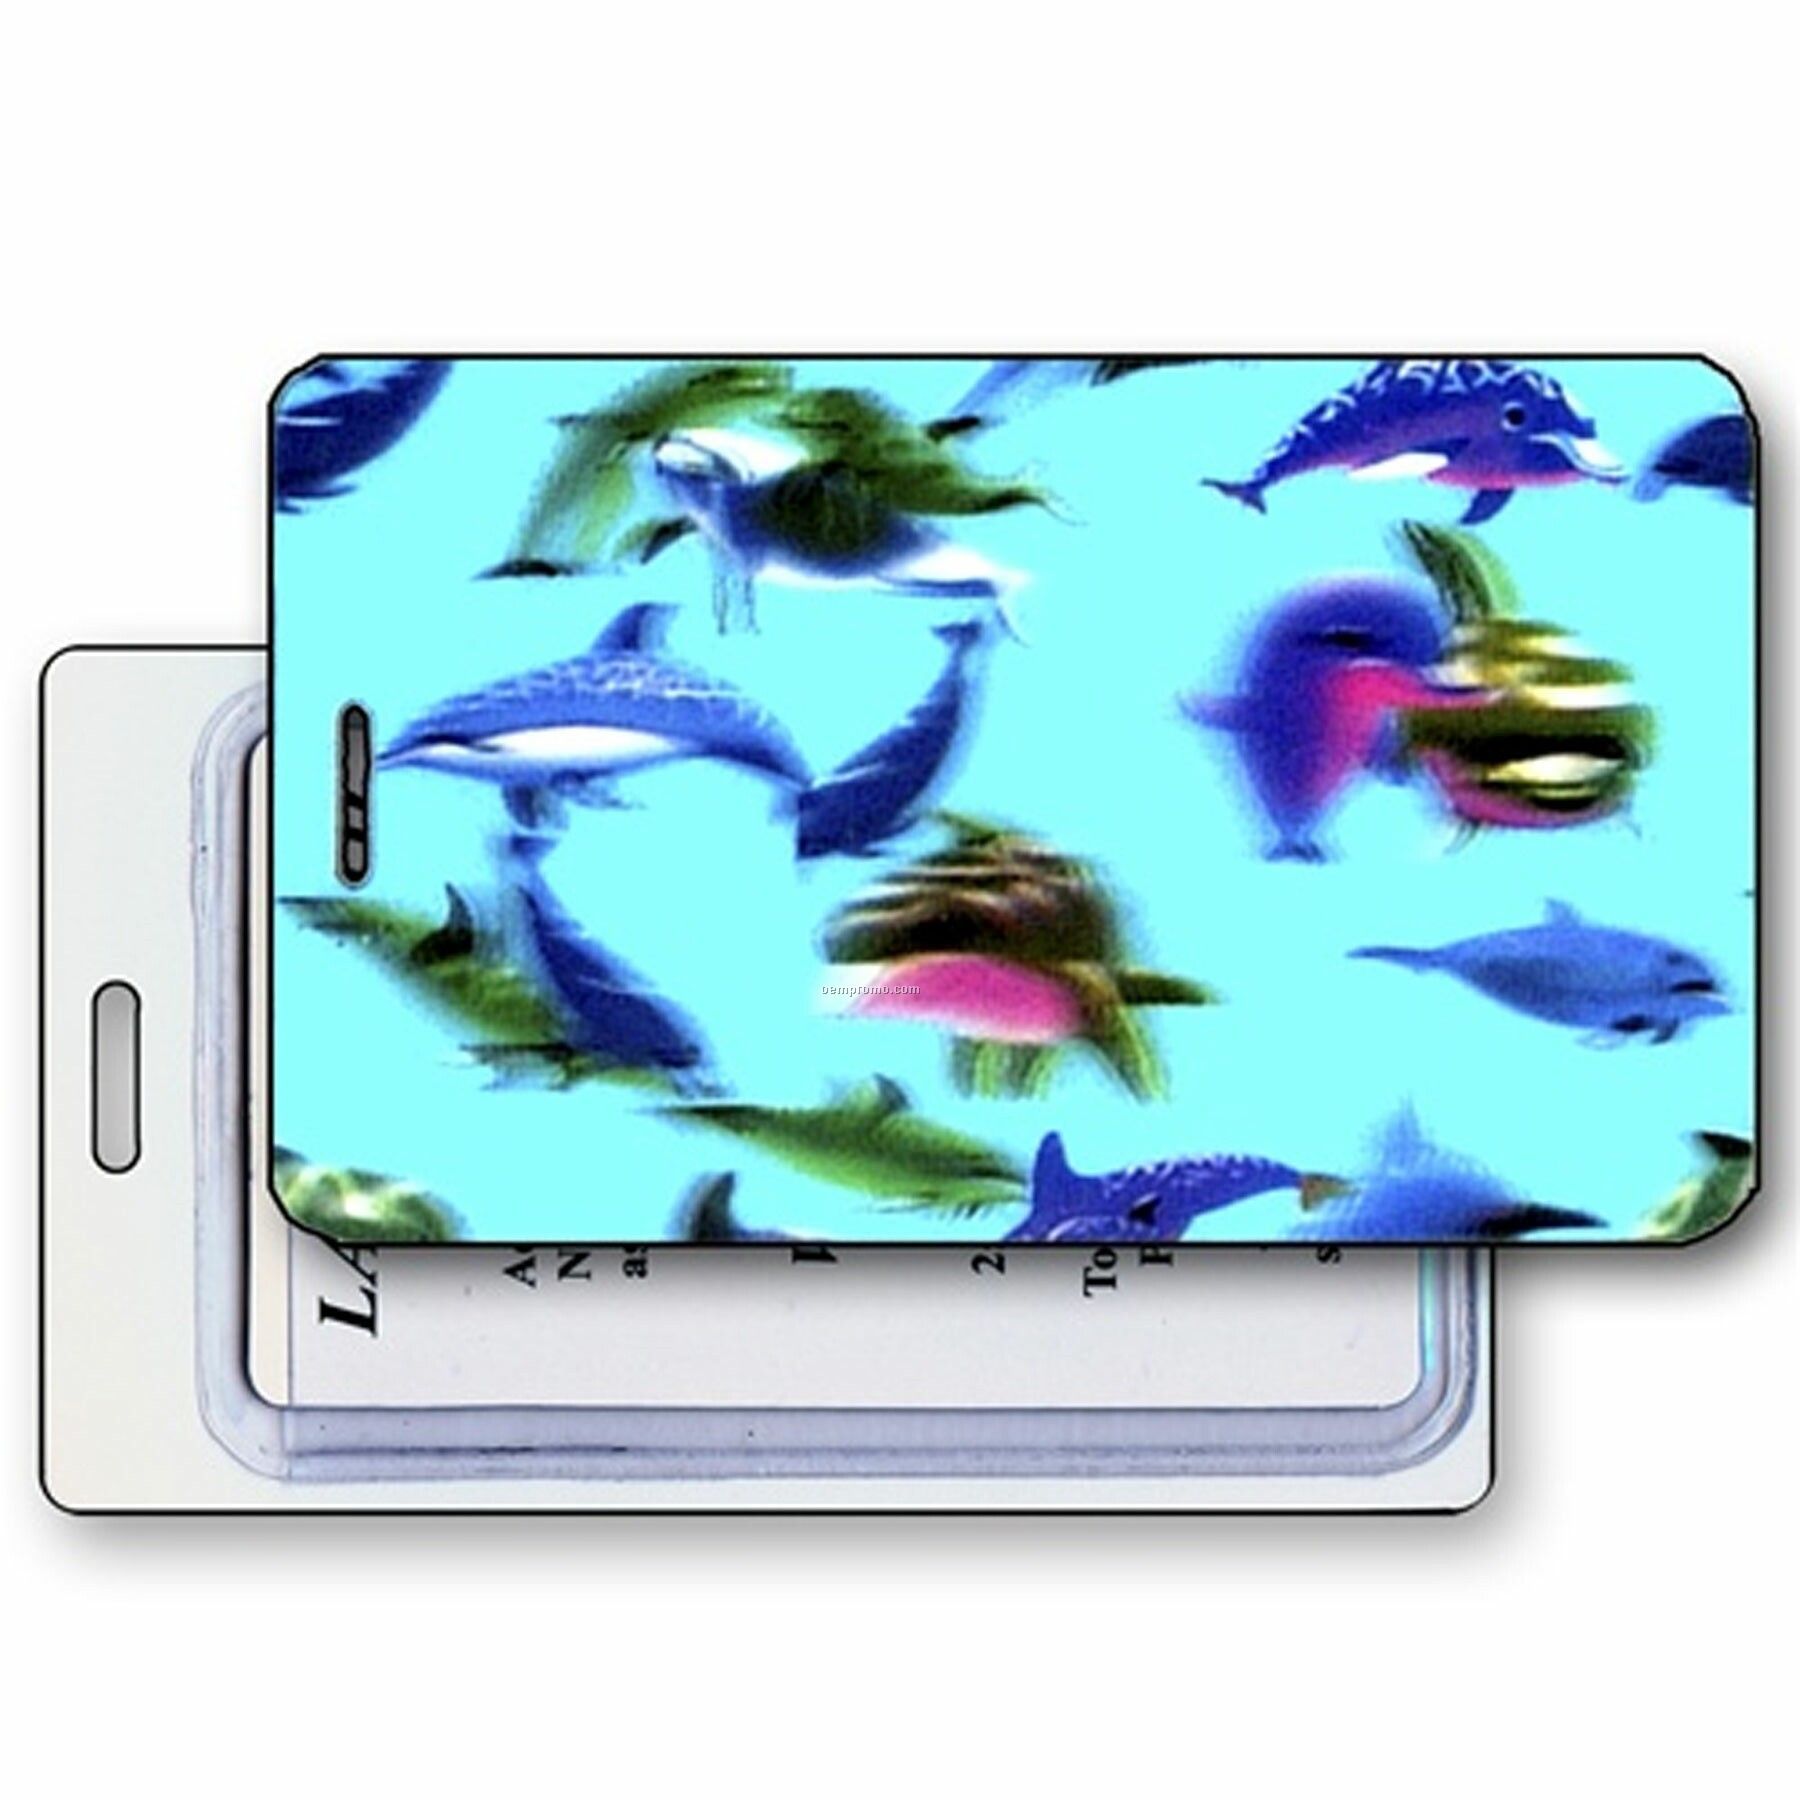 3d Lenticular Luggage Tags (Dolphins Swimming)